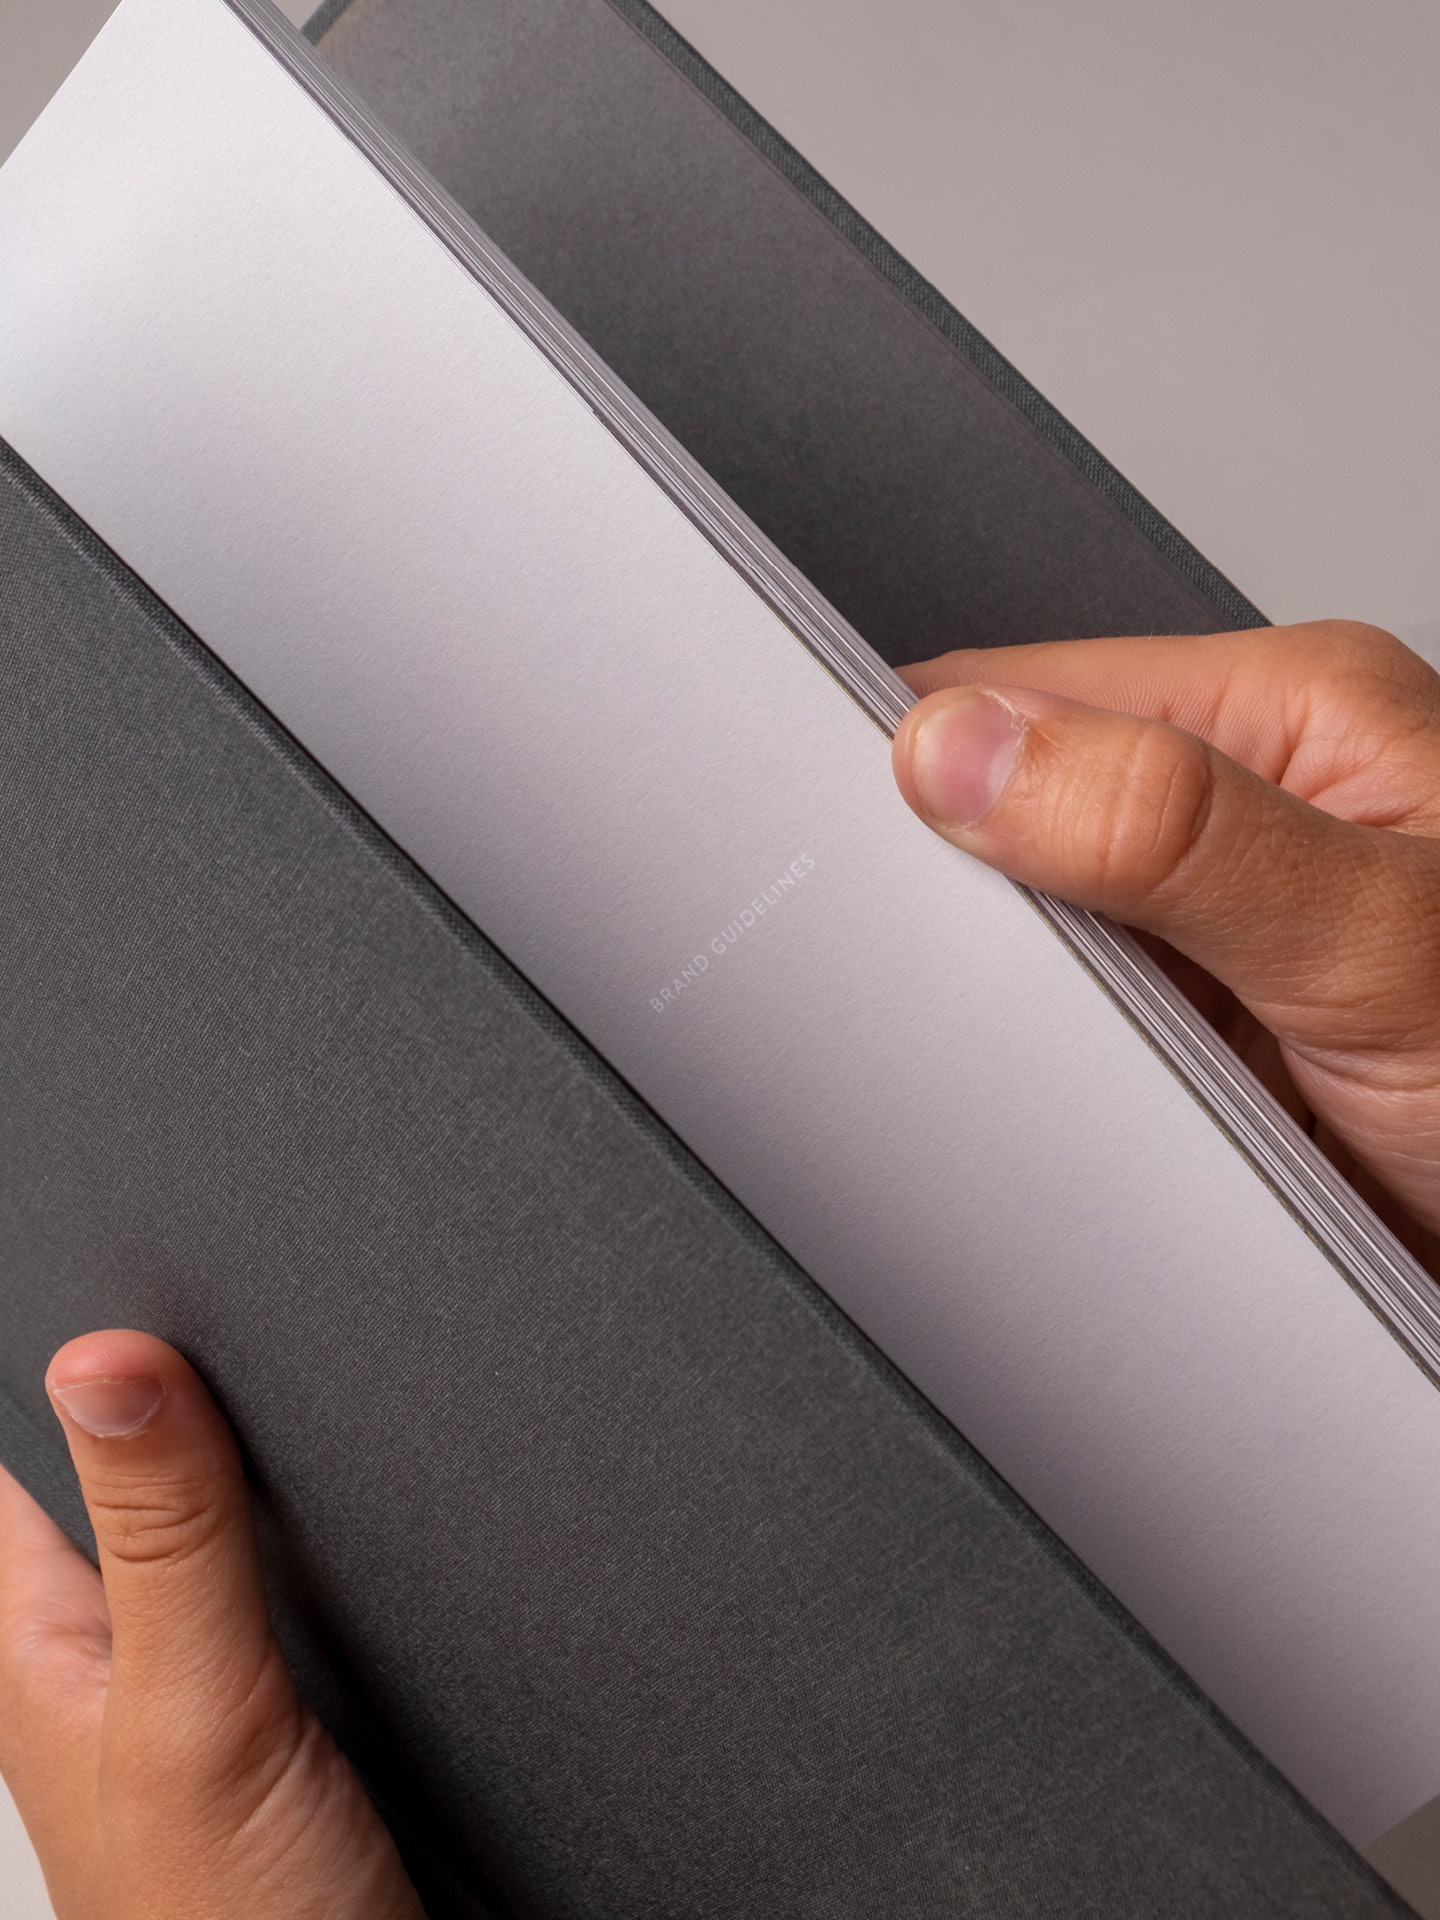 Detailed shot of the opening the brand guidelines book